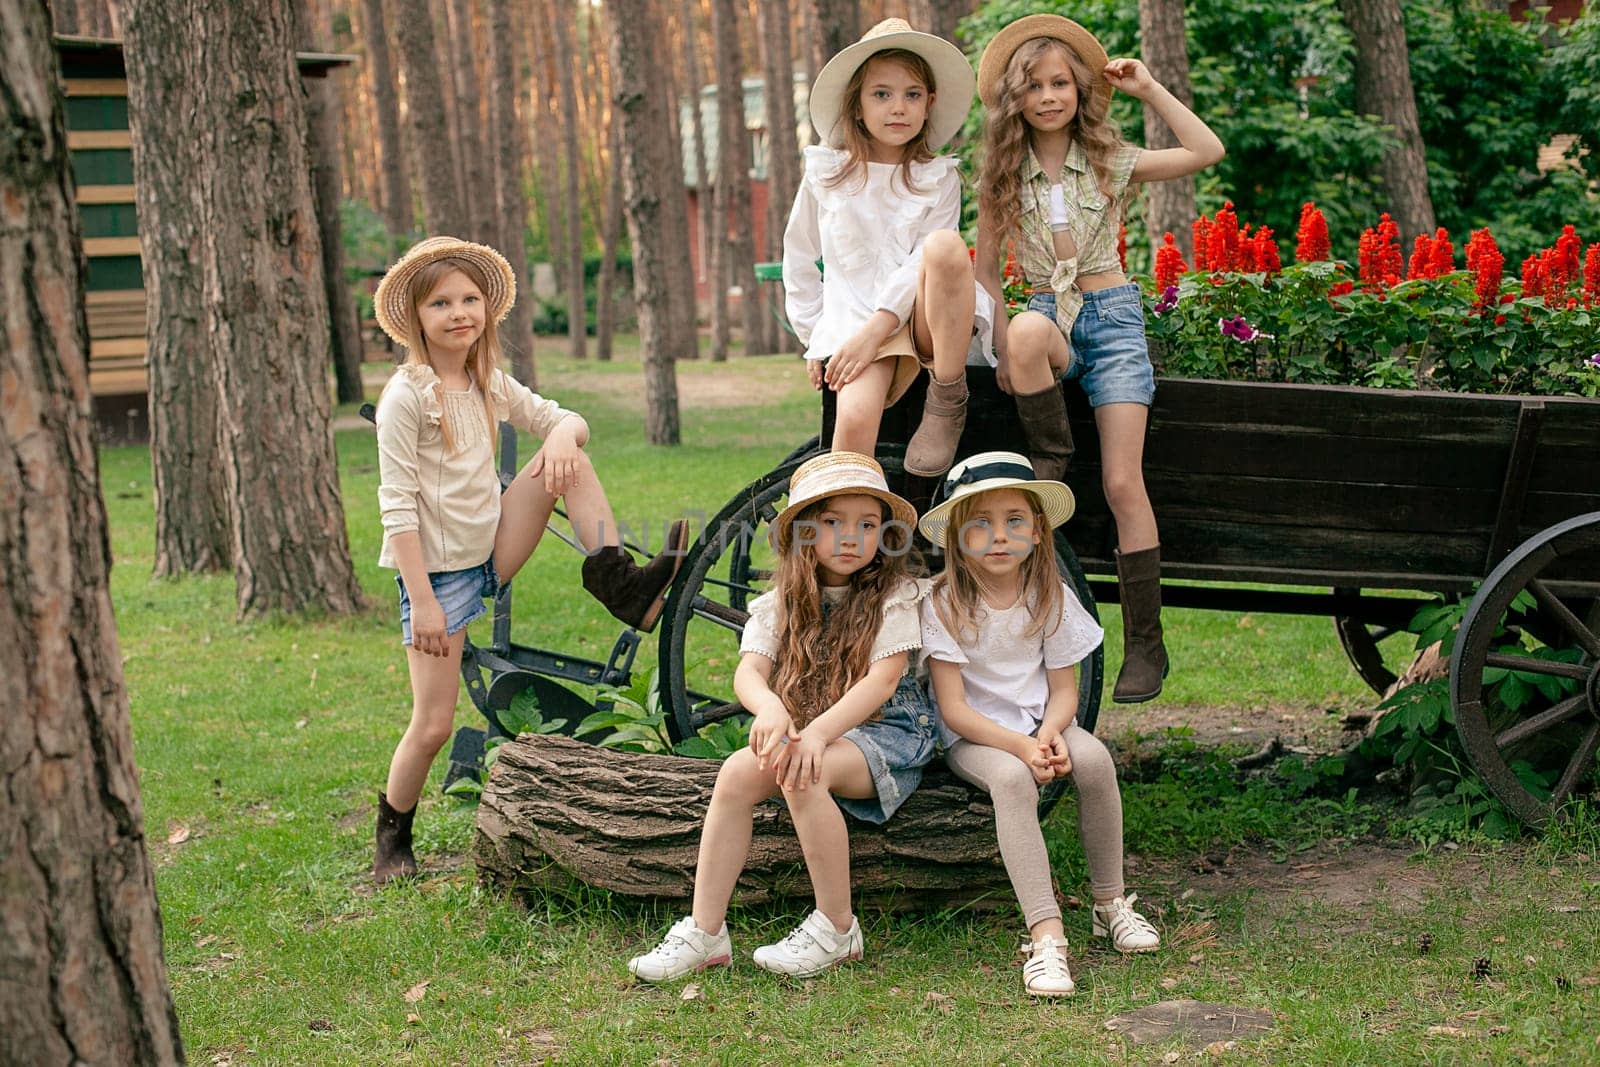 Happy carefree tween girls sitting on old wooden cart decorated as flower bed with blooming red salvia in courtyard of country estate located in pine forest on sunny day